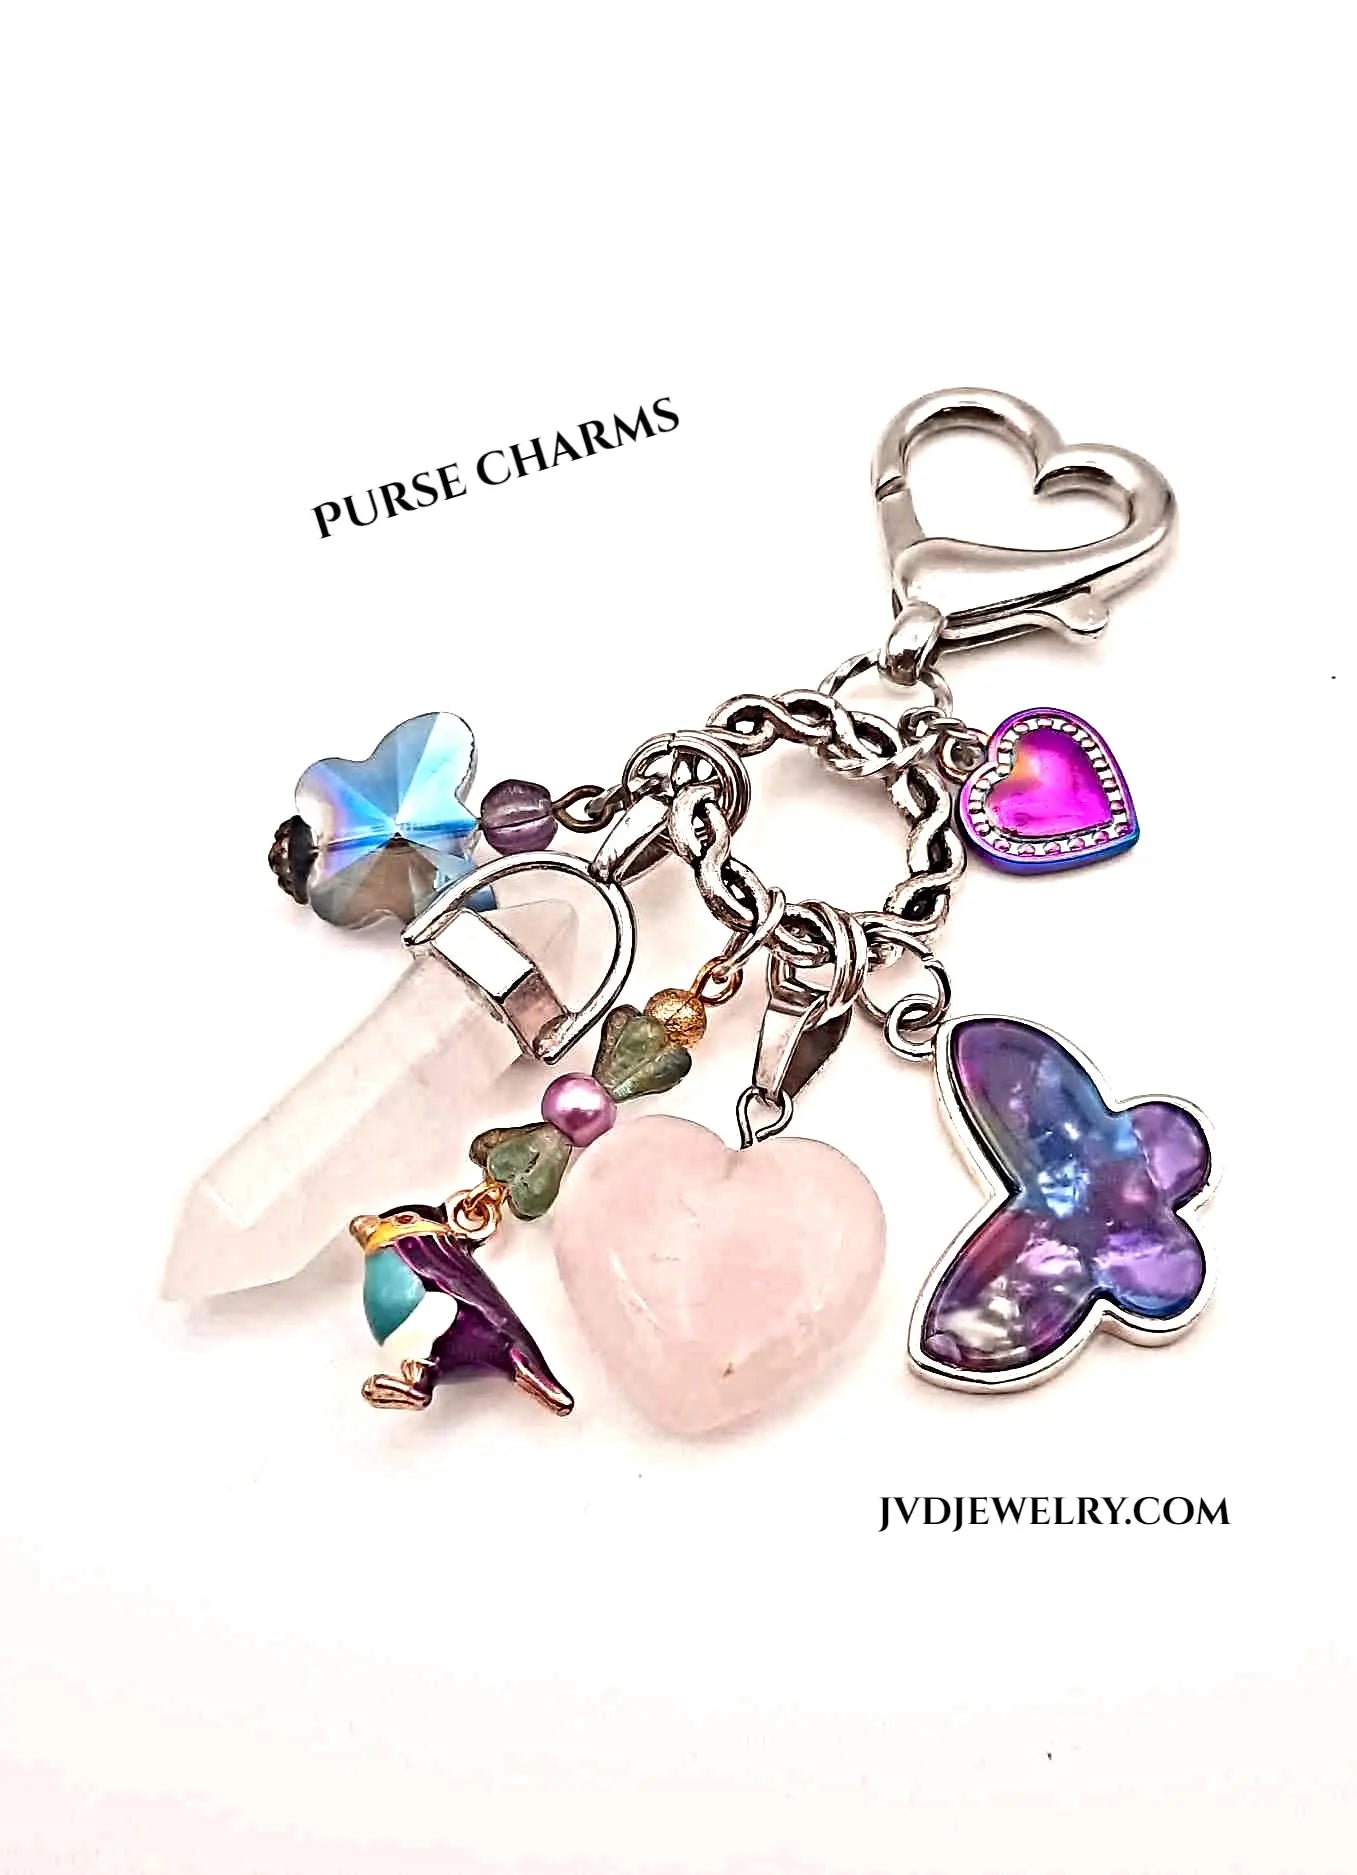 Purse charms with butterfly hearts birds heart clasp - Image #1